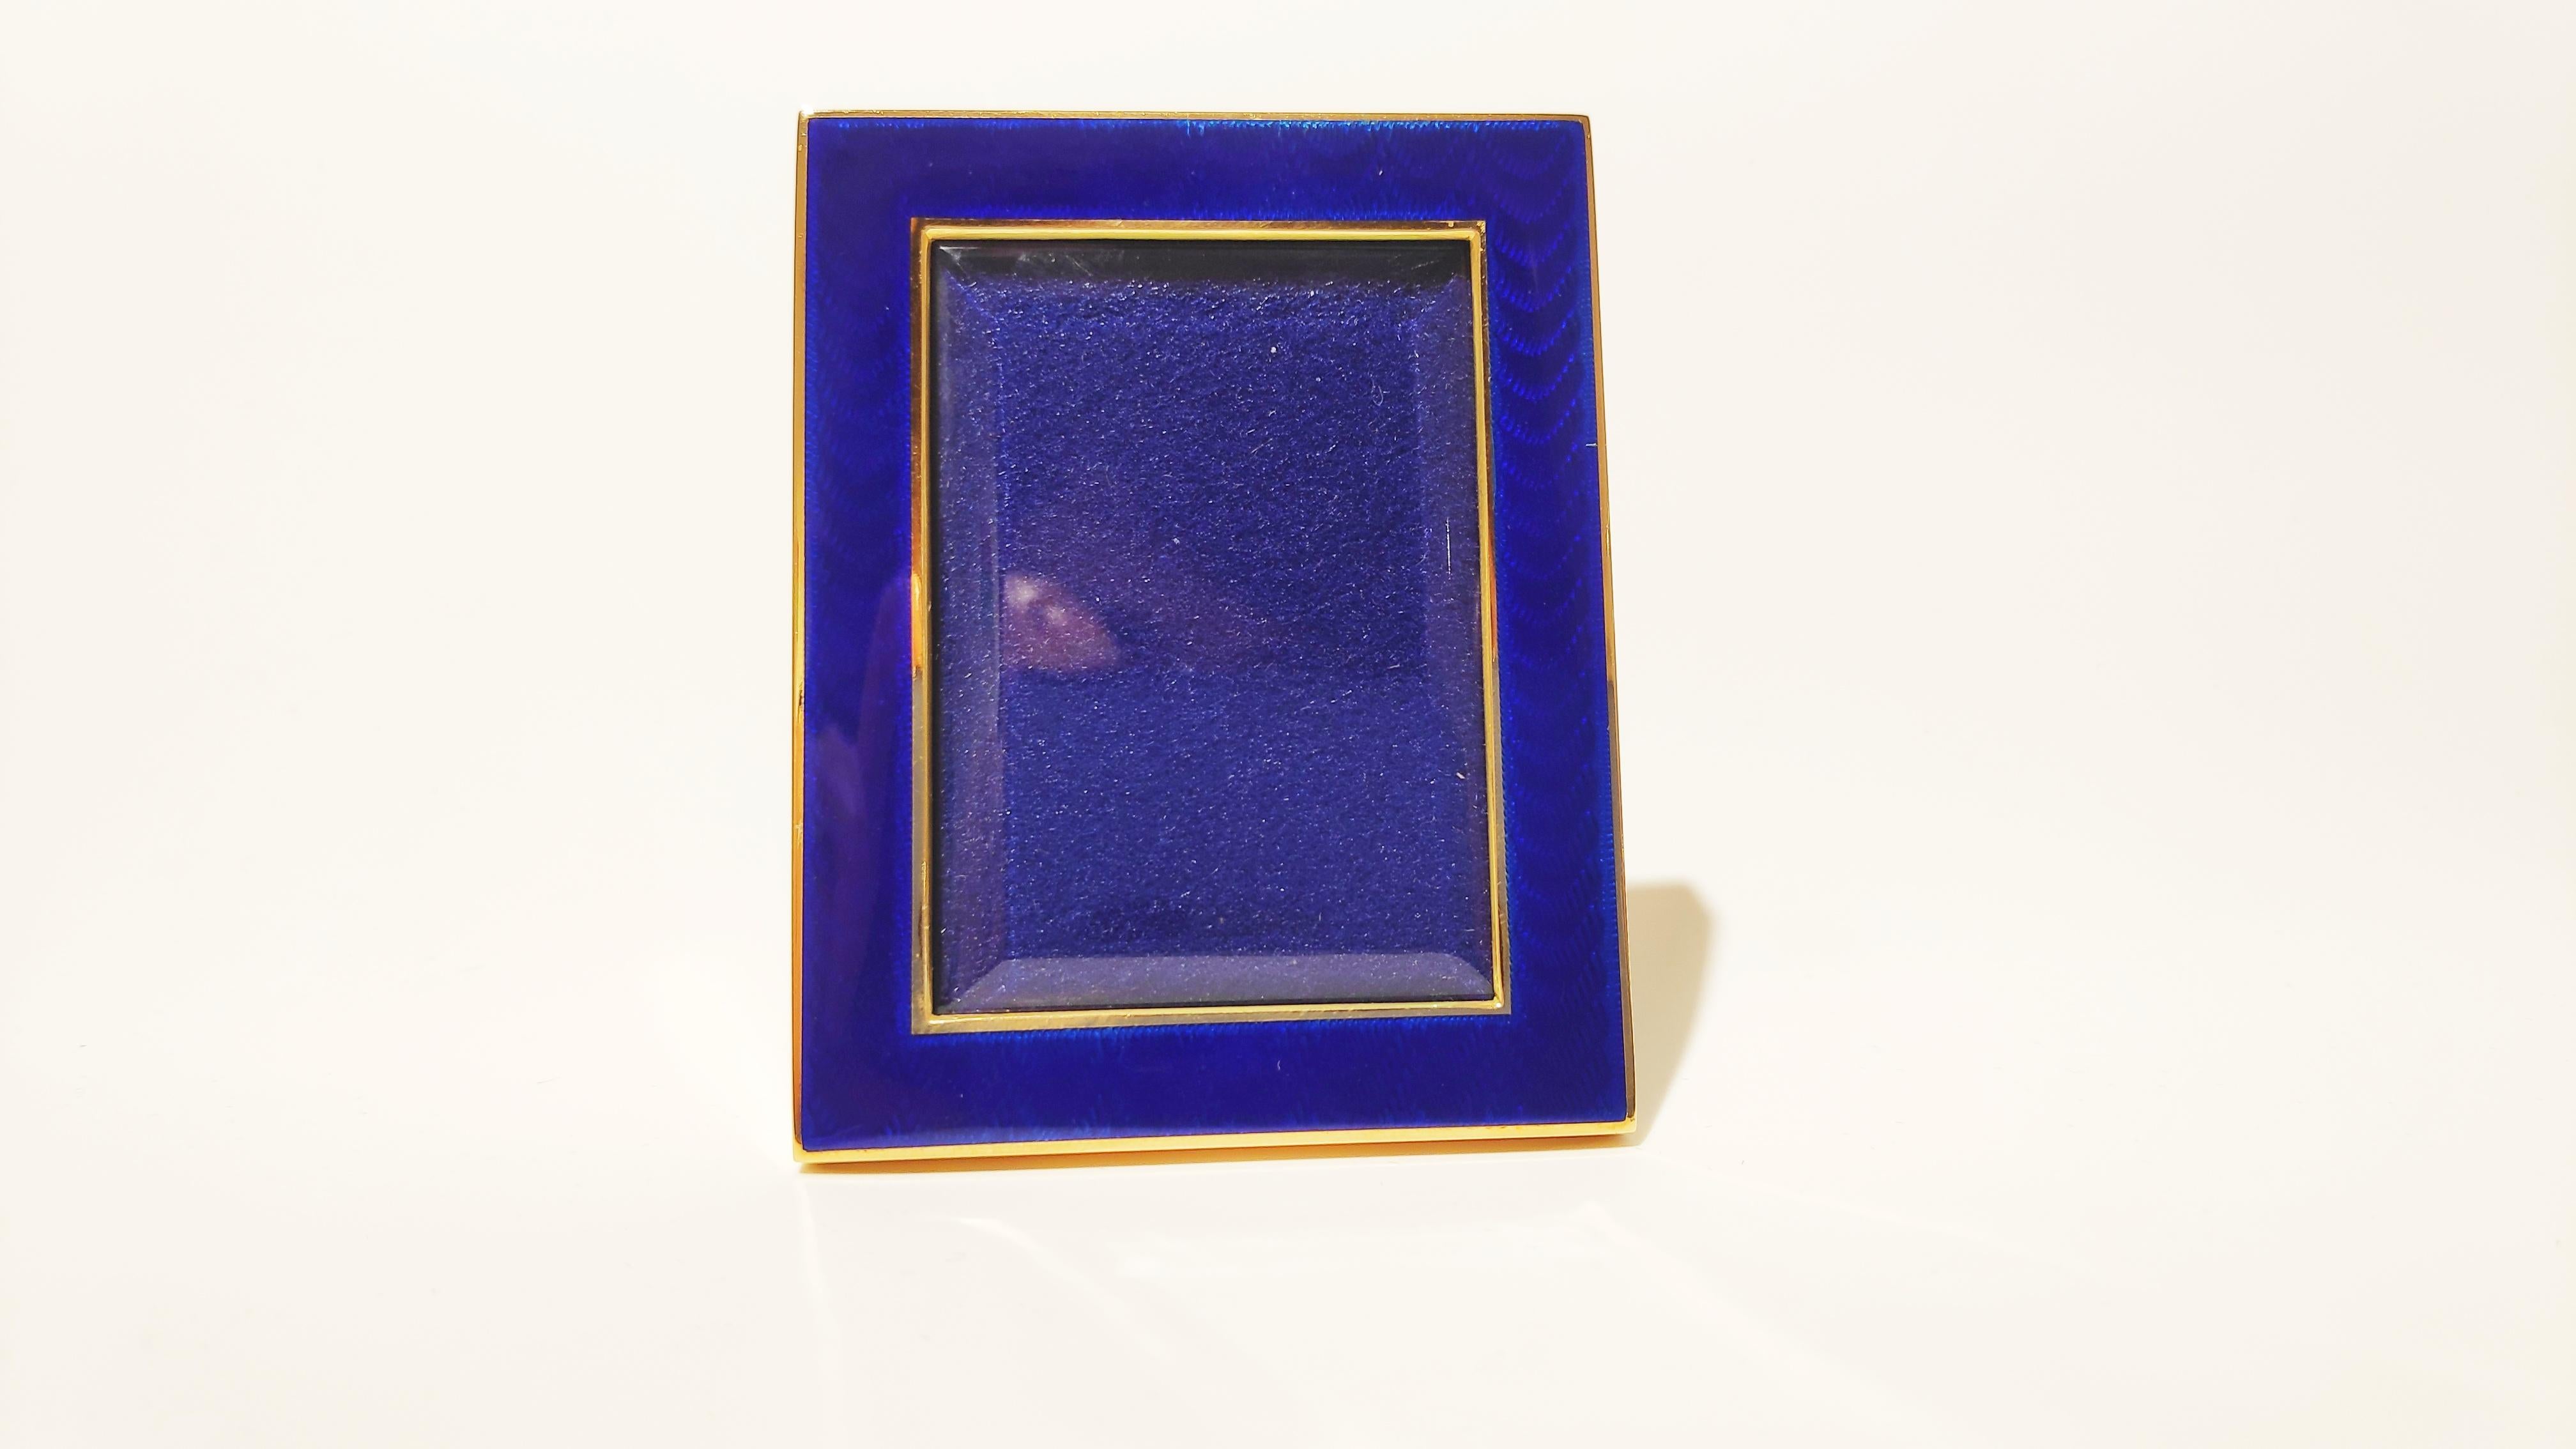 Frame in 18 kt yellow gold and blue enamel in excellent condition, elegant, antique, precious.
Net weight 37 grams of 18 kt yellow gold, total weight of the whole frame including glass 72 grams.